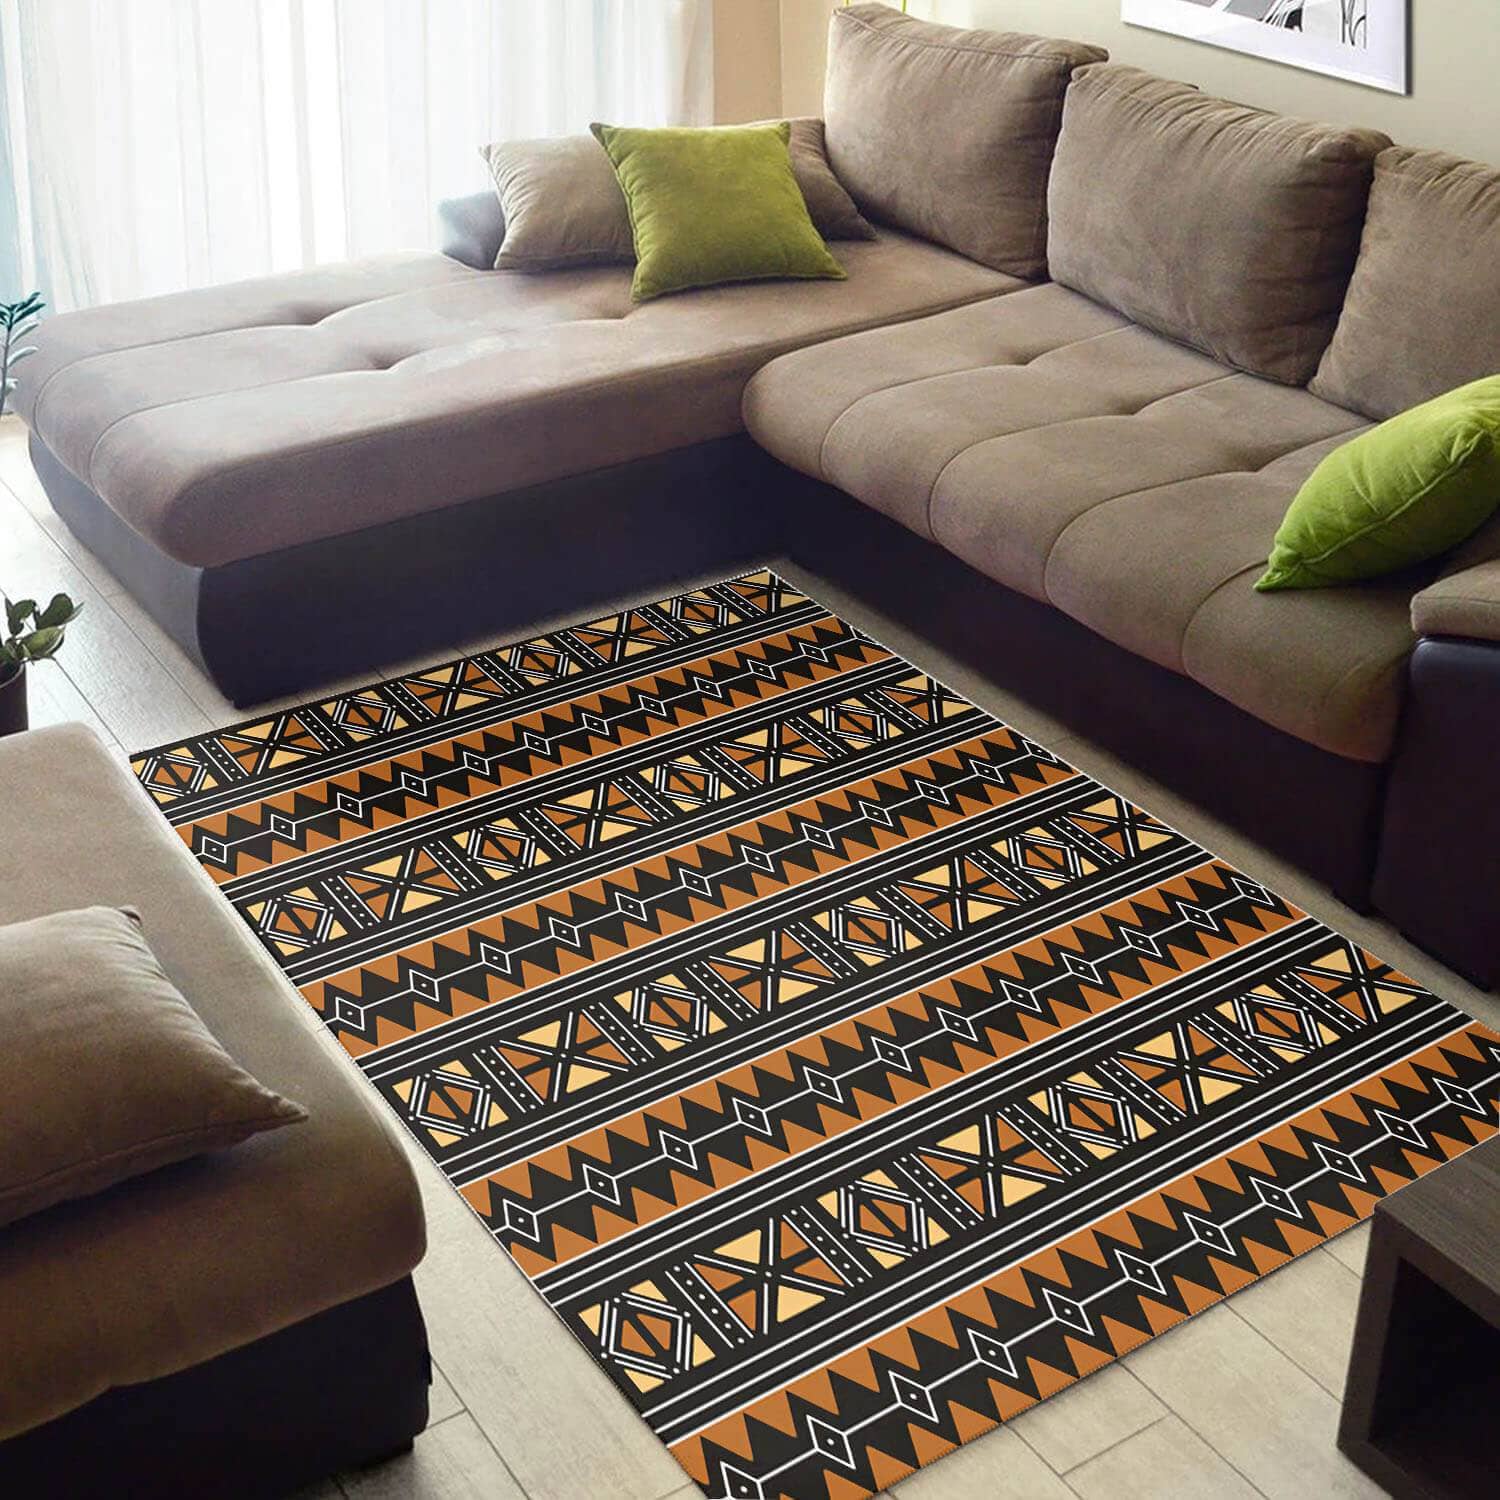 Beautiful African Cute Themed Ethnic Seamless Pattern Style Area Living Room Rug